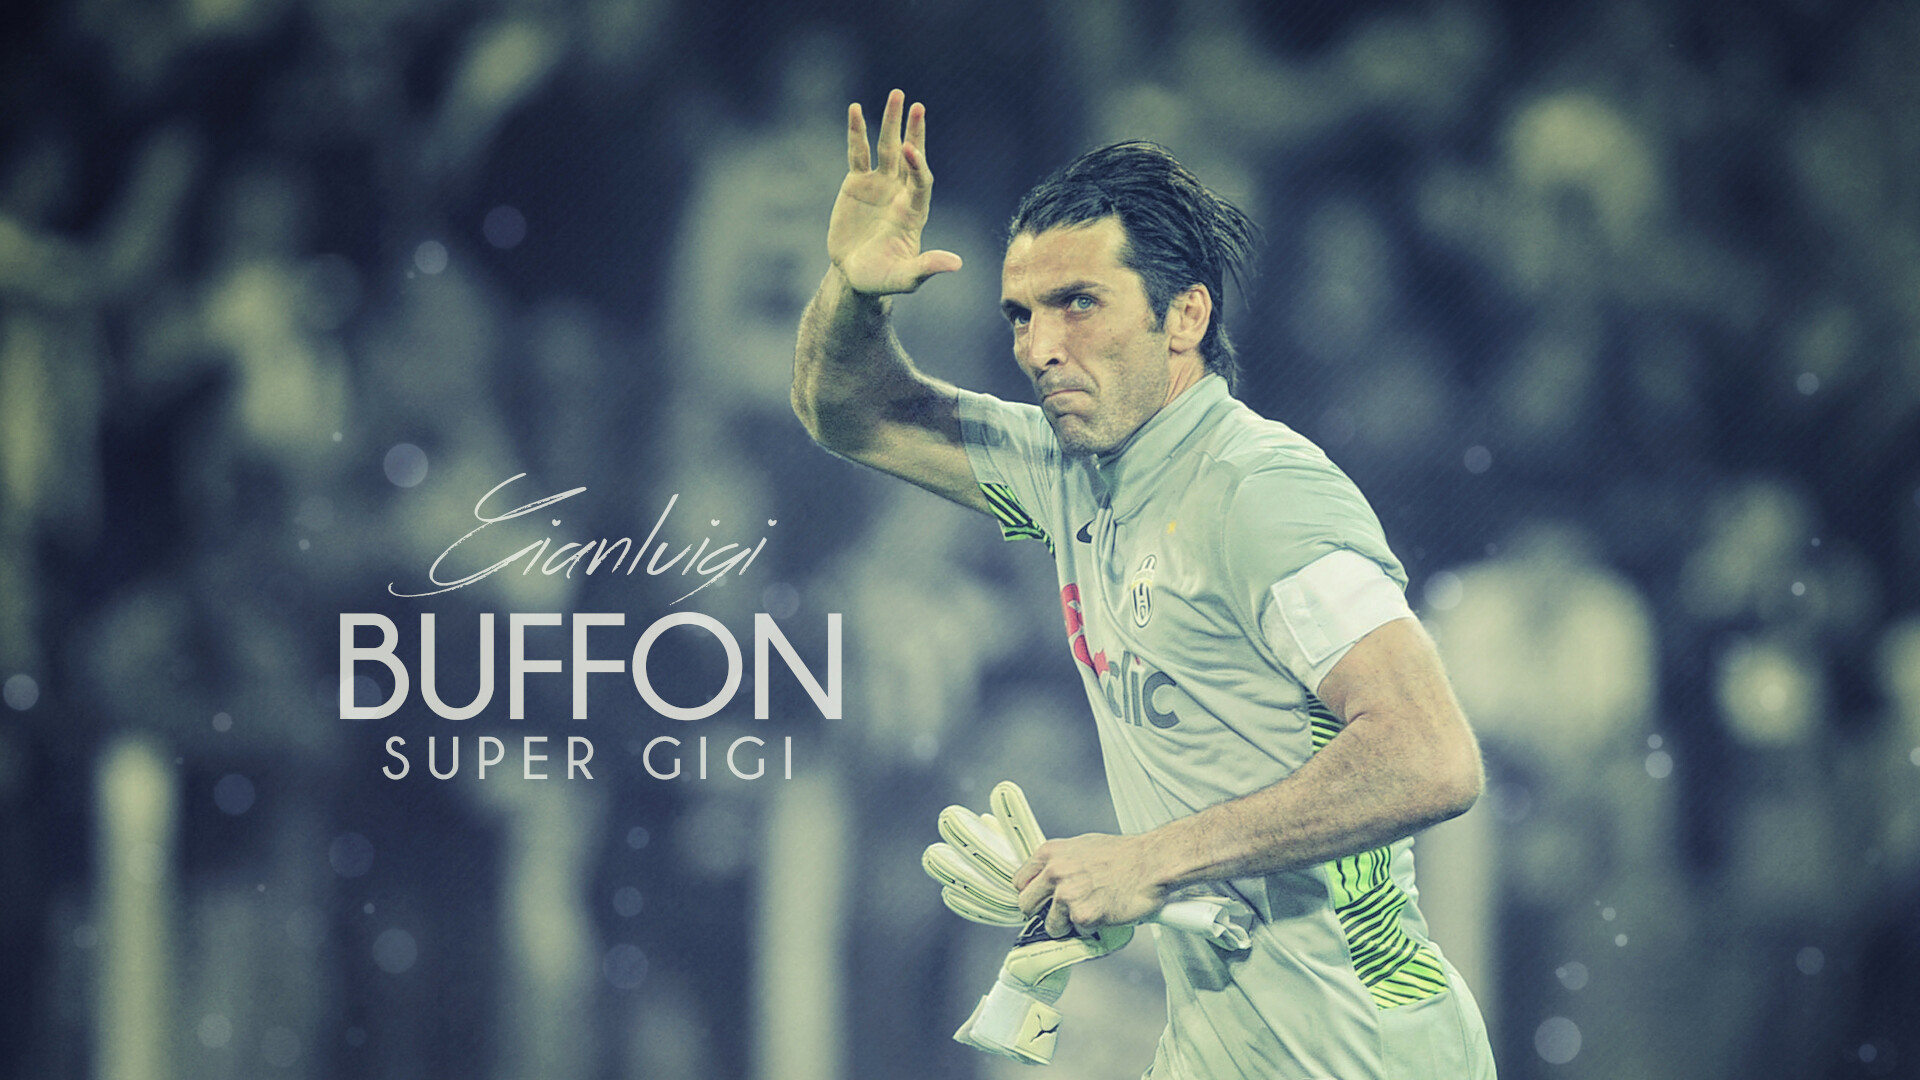 Gianluigi Buffon: Super Gigi, Juventus Football Club, The second-oldest player to appear in Serie A. 1920x1080 Full HD Wallpaper.